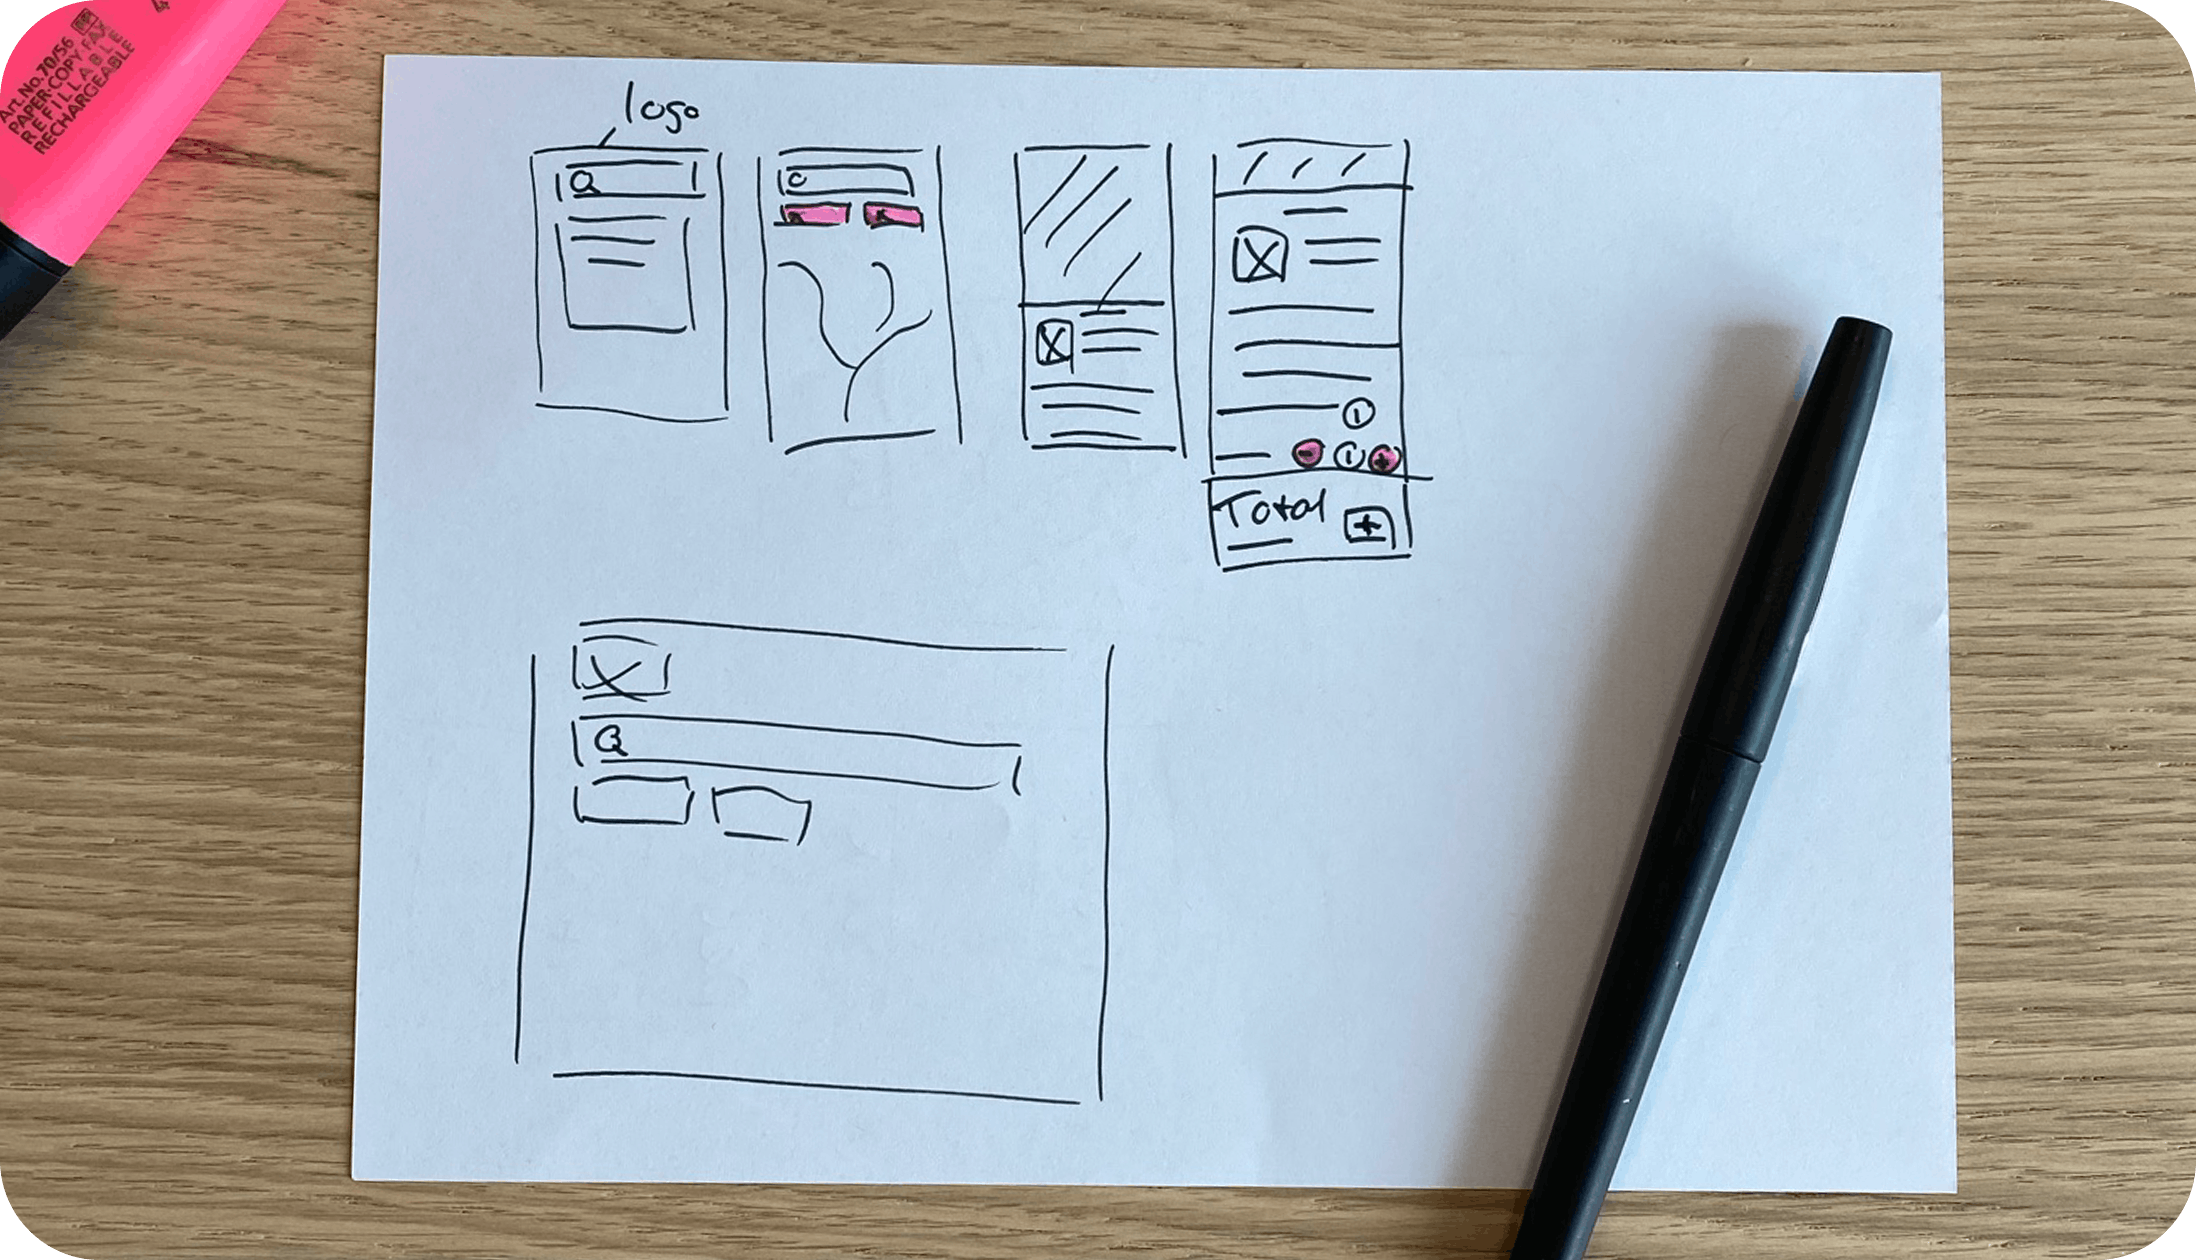 Sketches of the fdtrck app